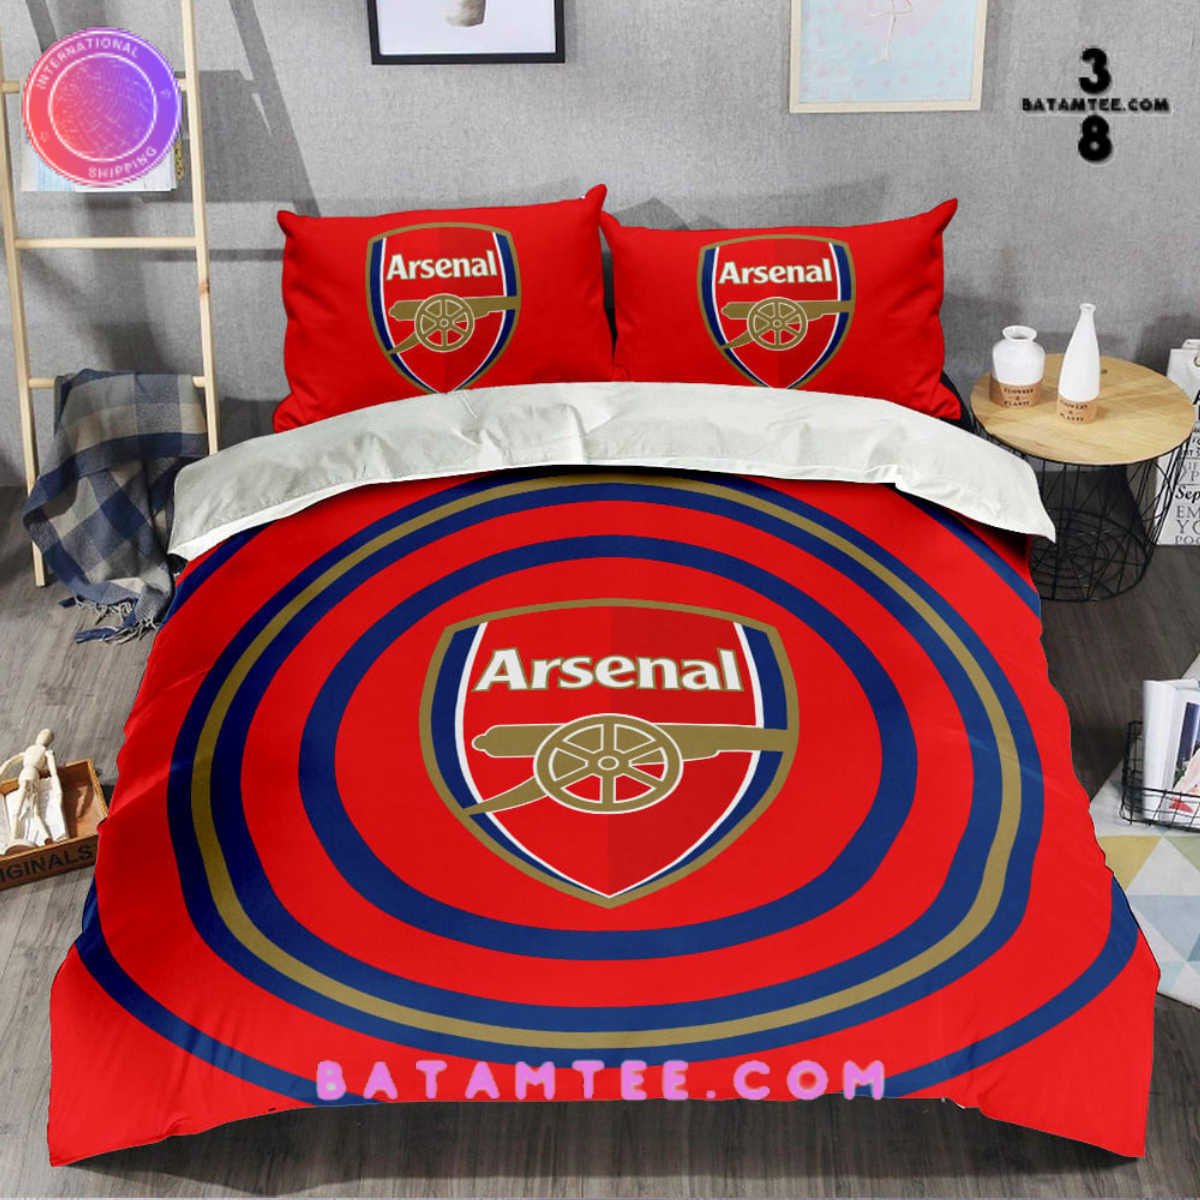 New Bedding Set collection for Arsenal fans-Limited Edition's Overview - Batamtee Shop - Threads & Totes: Your Style Destination